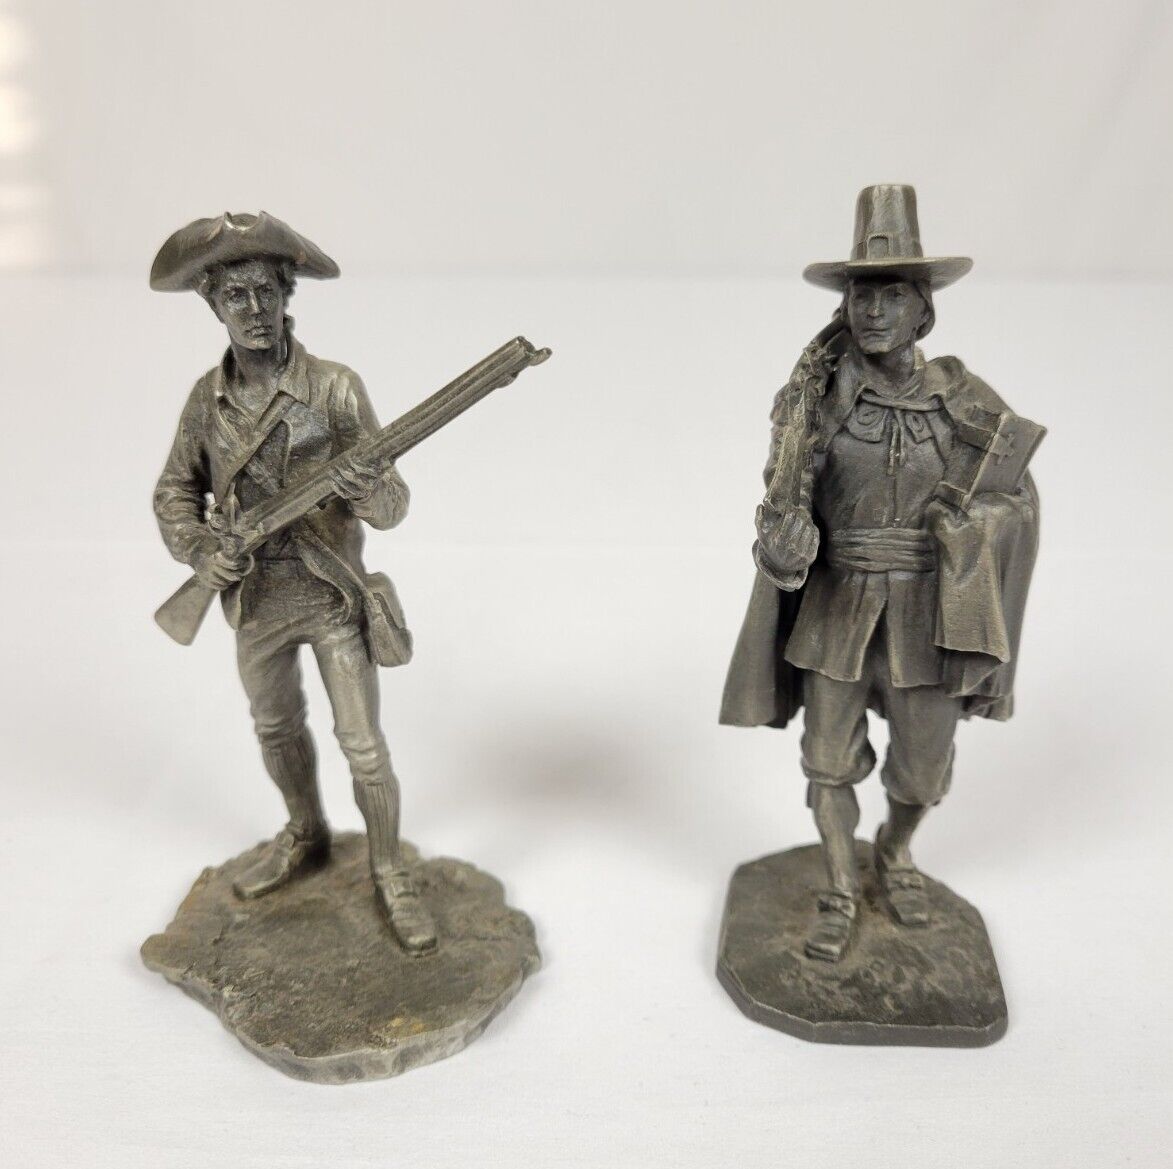 American Sculpture Society Fine Pewter The Pilgrim And The Minuteman Figures